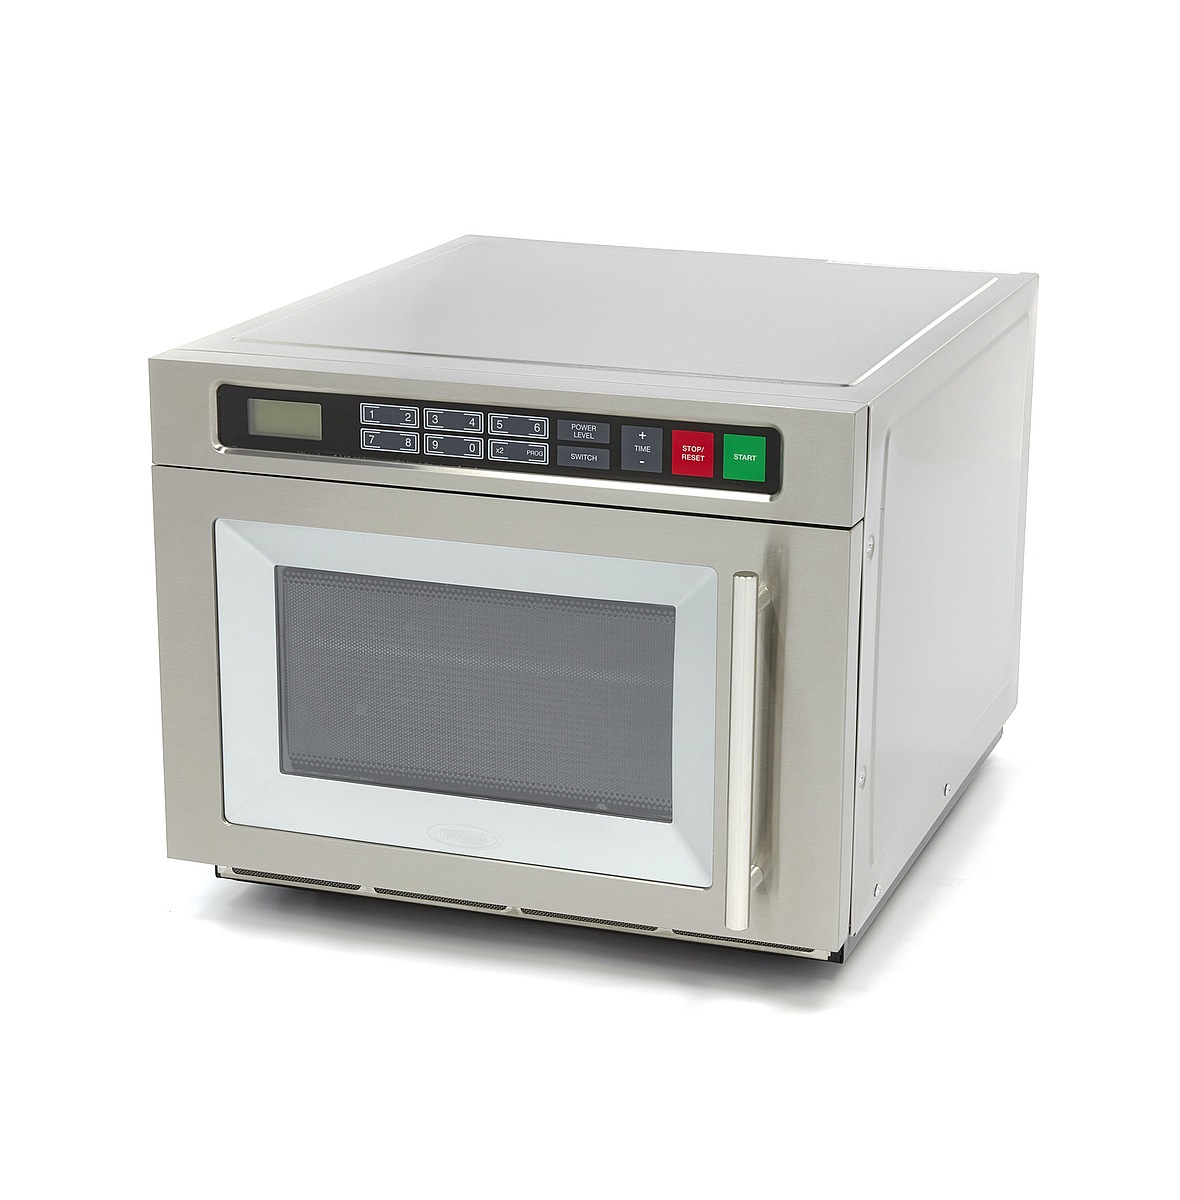 Industrial Microwave Oven Price Cheap China Sell Like Hot Cake